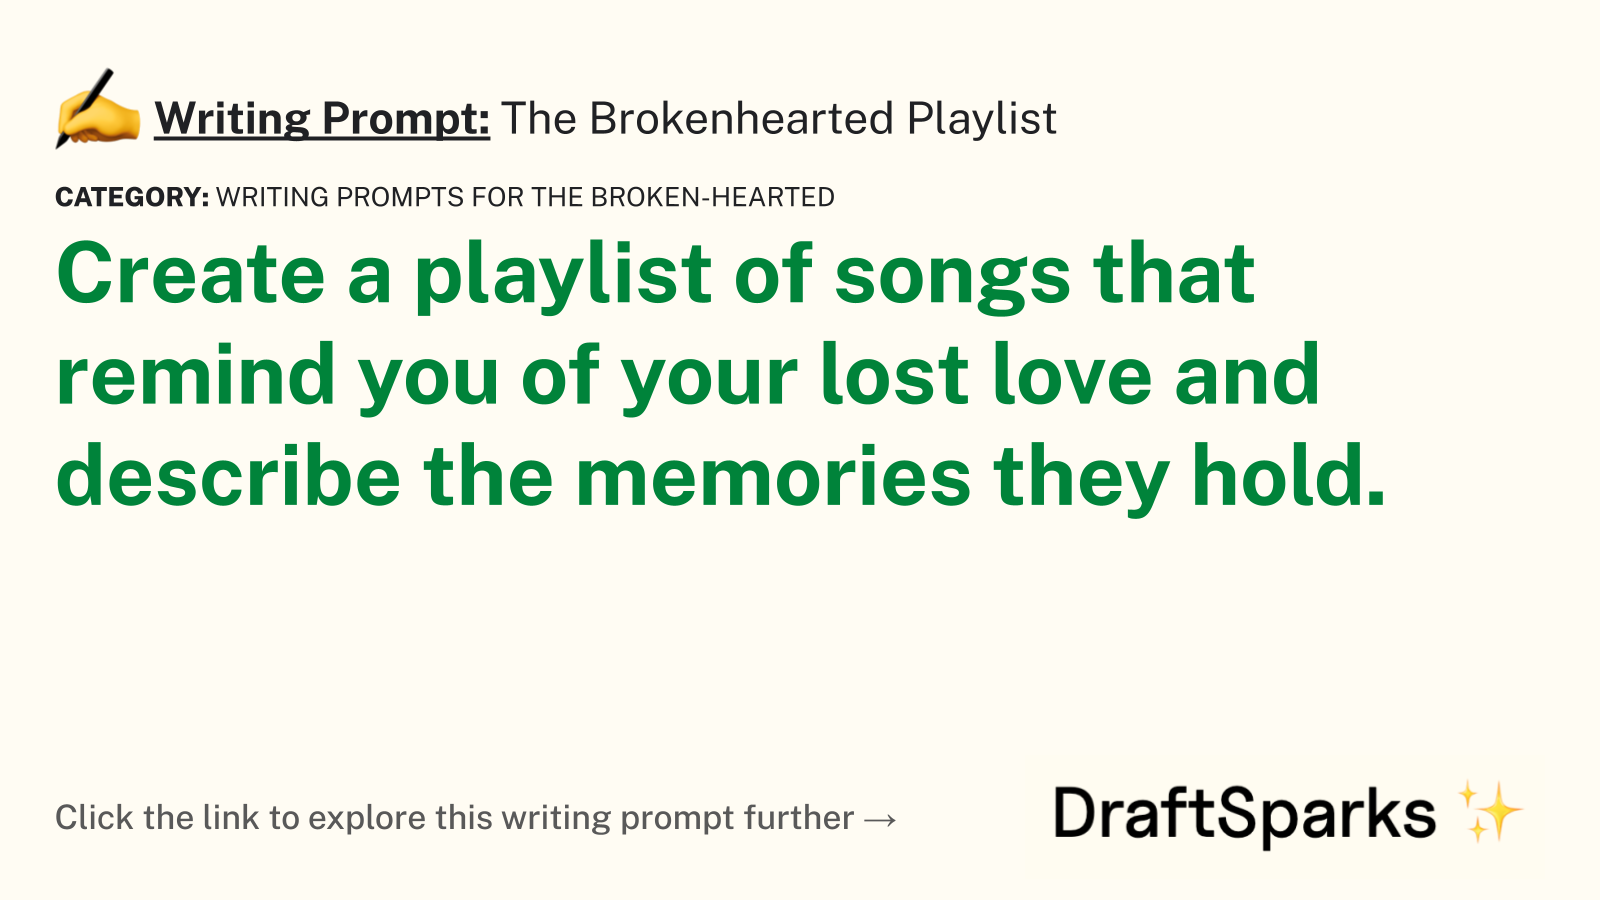 The Brokenhearted Playlist